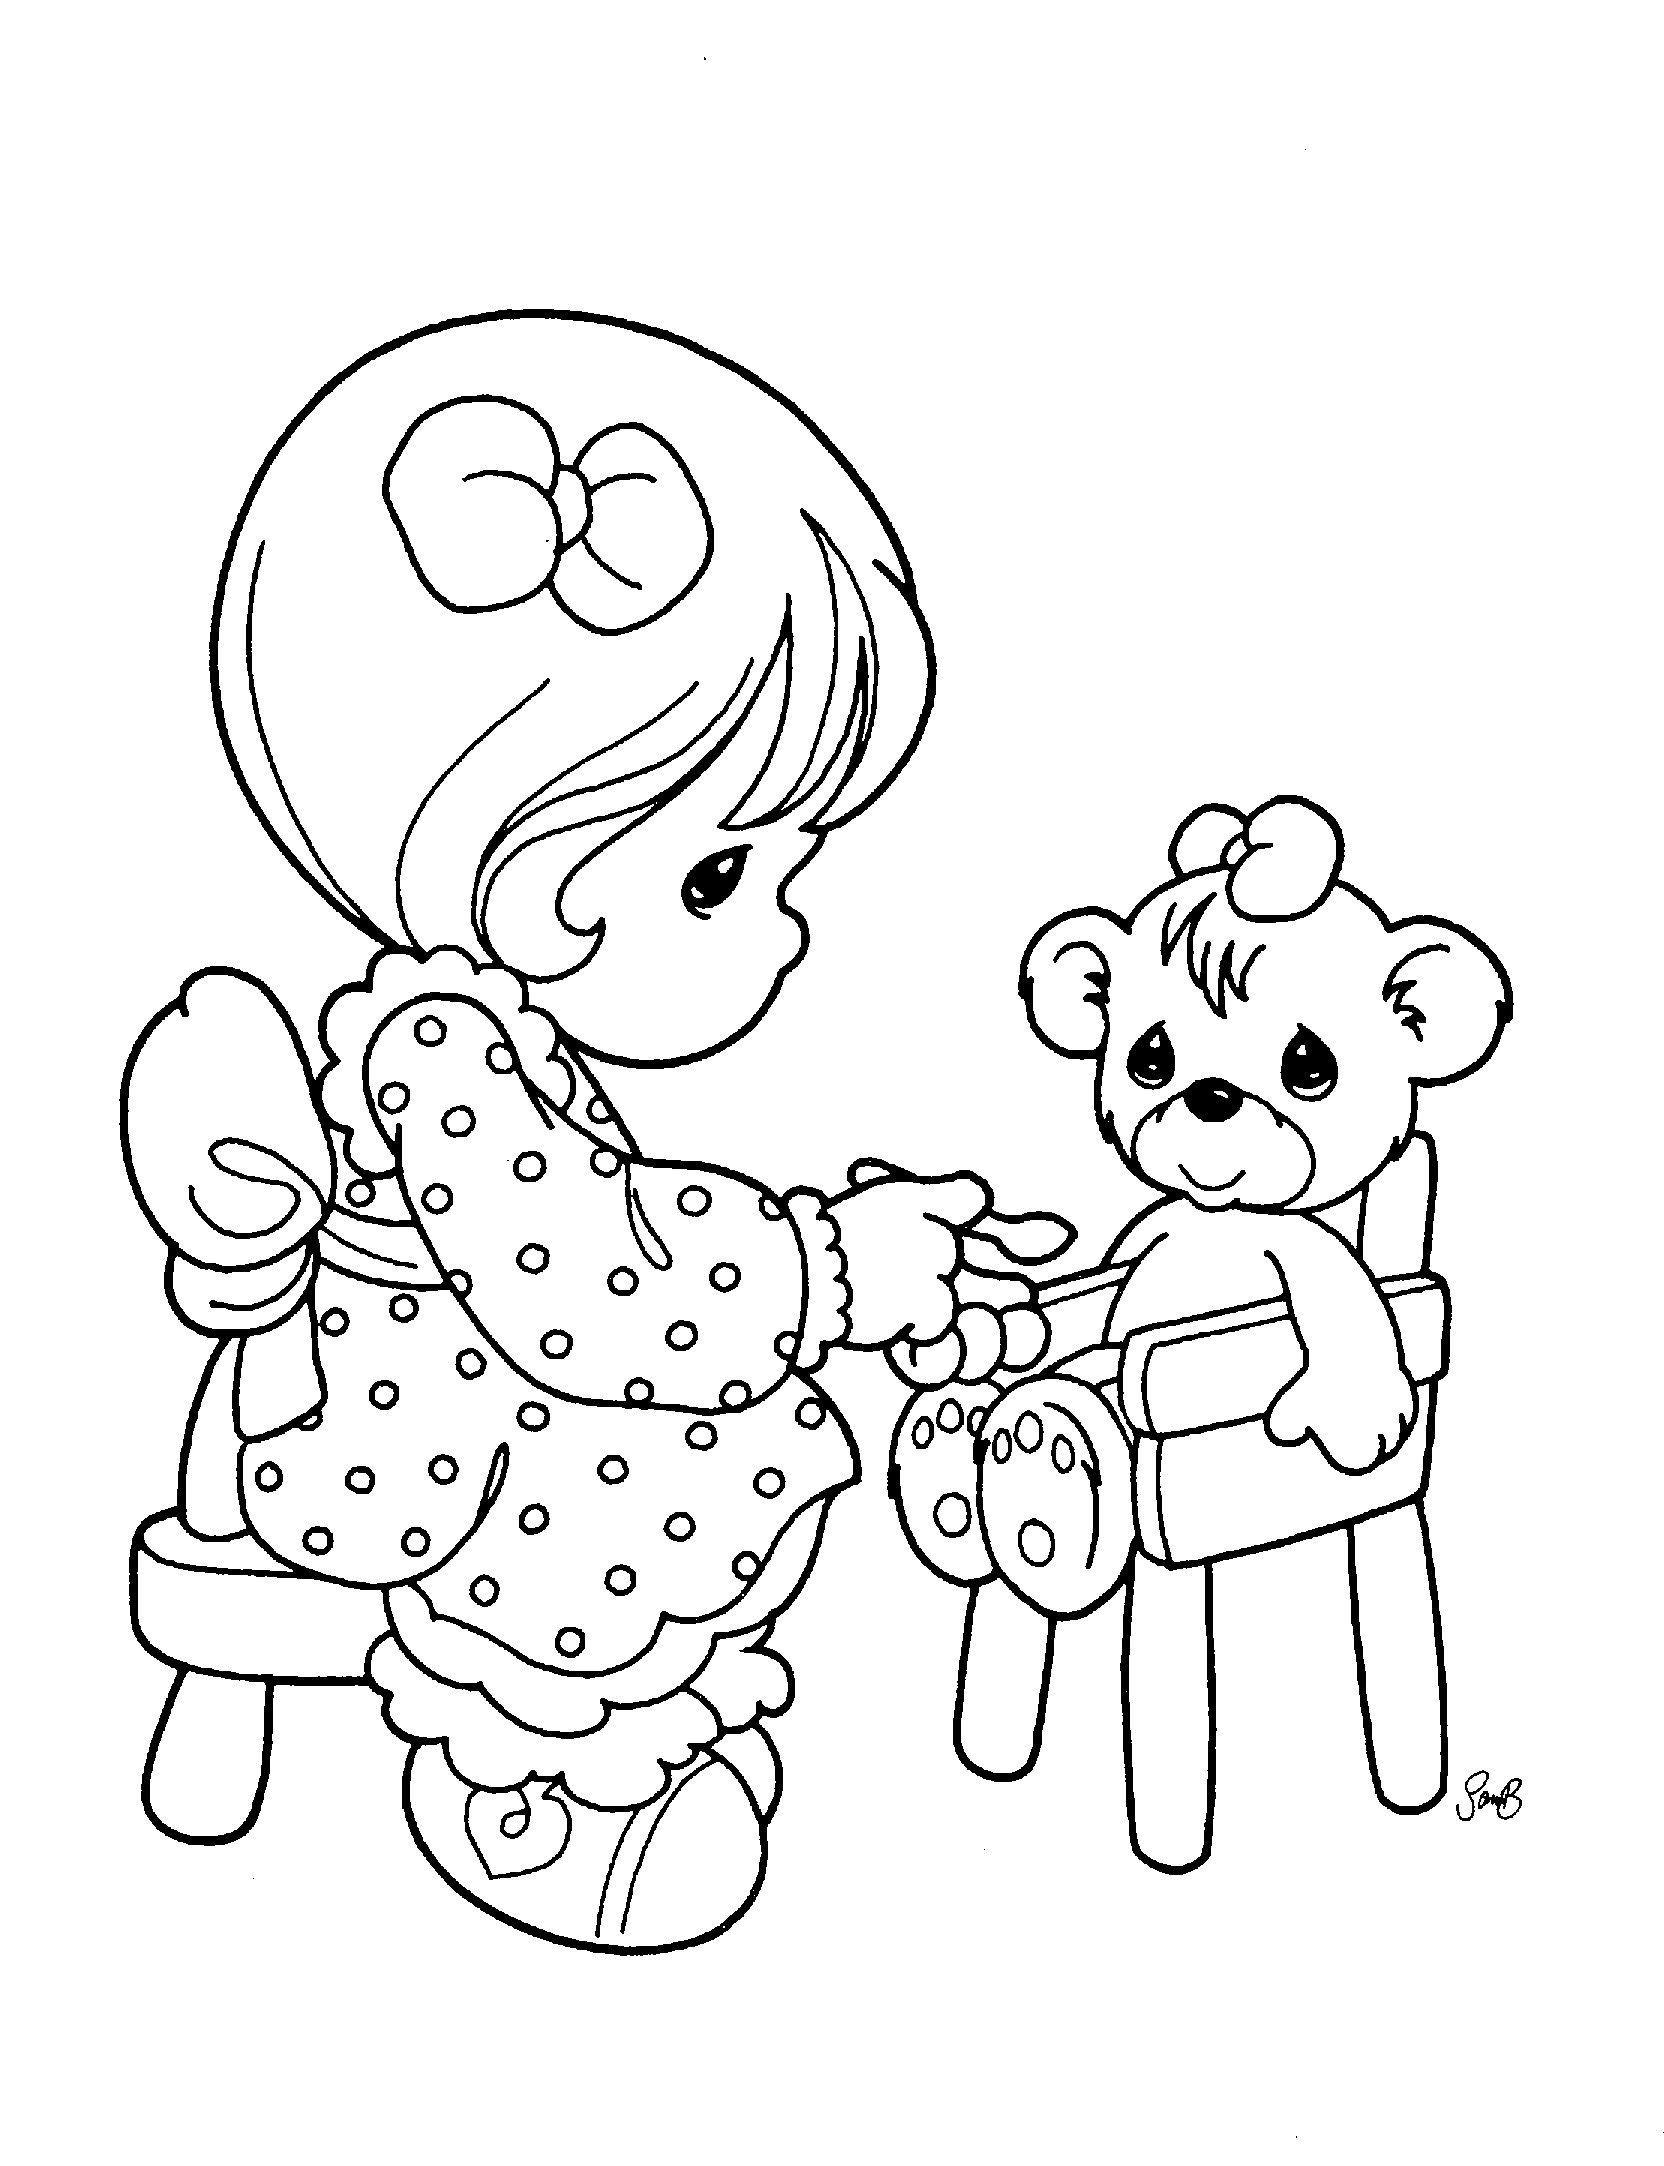 1664x2166 Draw Precious Moments Thanksgiving Coloring Pages 45 For Coloring Print  with Precious Moments Thanksgiving Coloring Pages